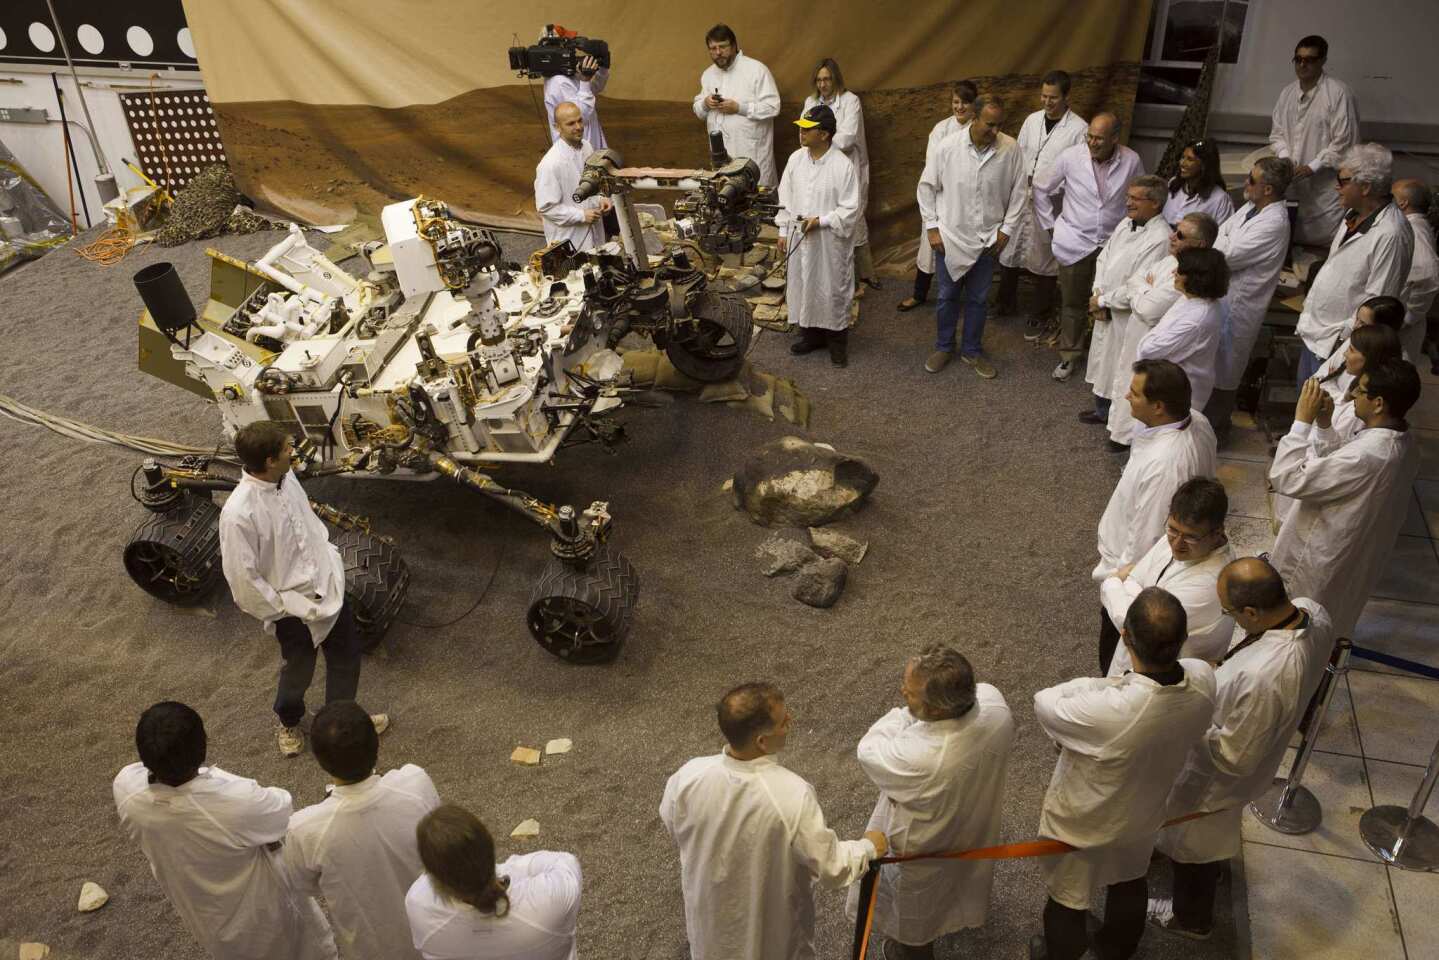 Scientists at the Jet Propulsion Laboratory in La Cañada Flintridge gather around a replica of the Mars rover Curiosity. After a journey of nearly nine months, the six-wheel laboratory is scheduled to touch down on the Red Planet at 10:31 p.m. PDT on Aug. 5.